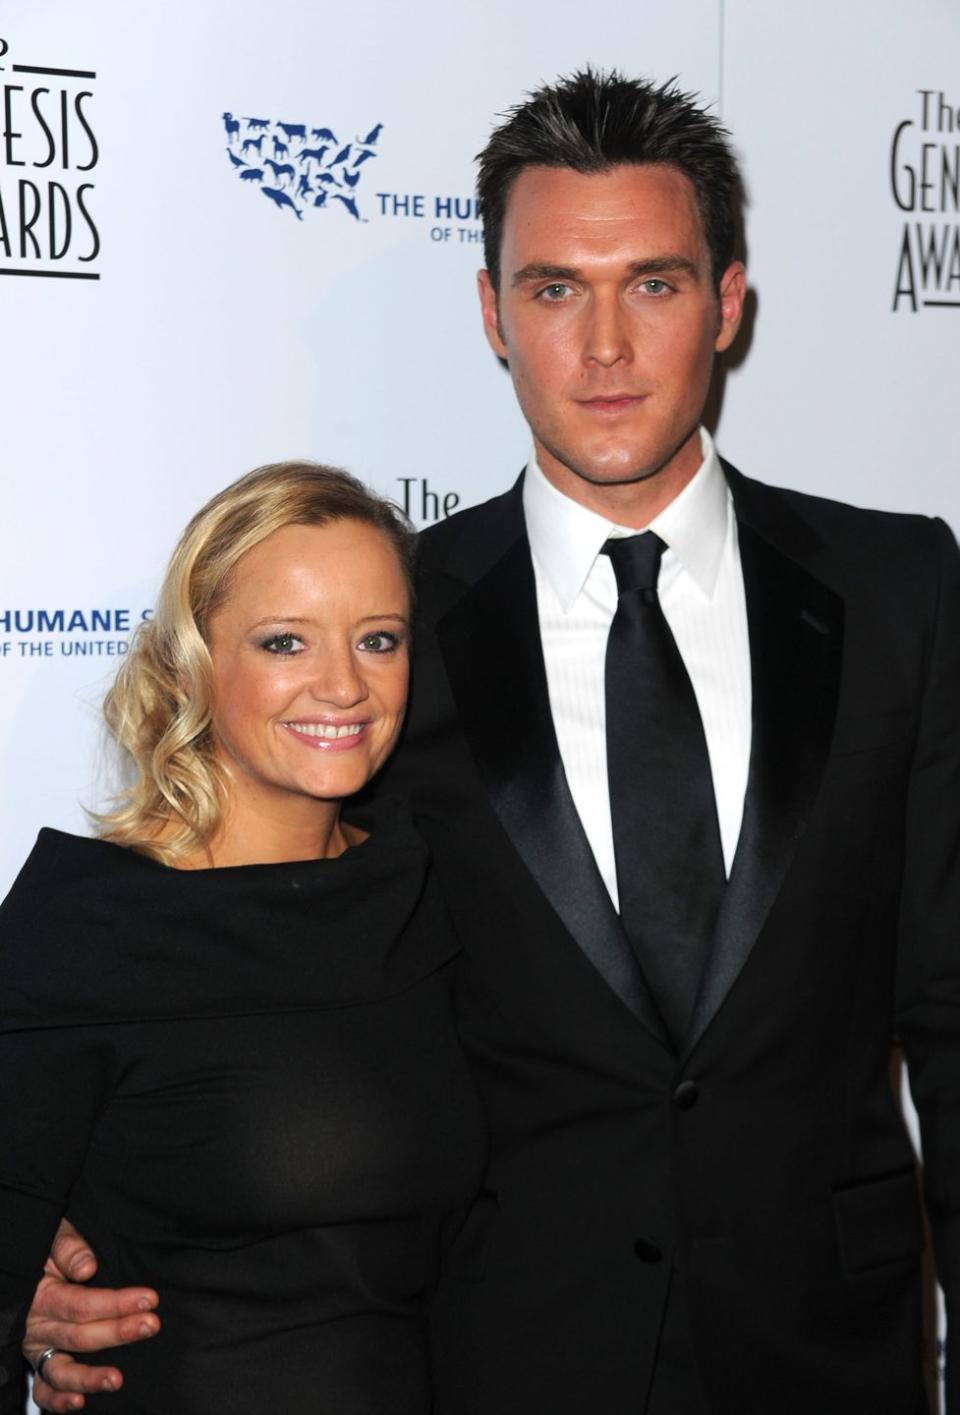 Yeowan's then-wife Lucy Davis had a small role on the second season of the show.